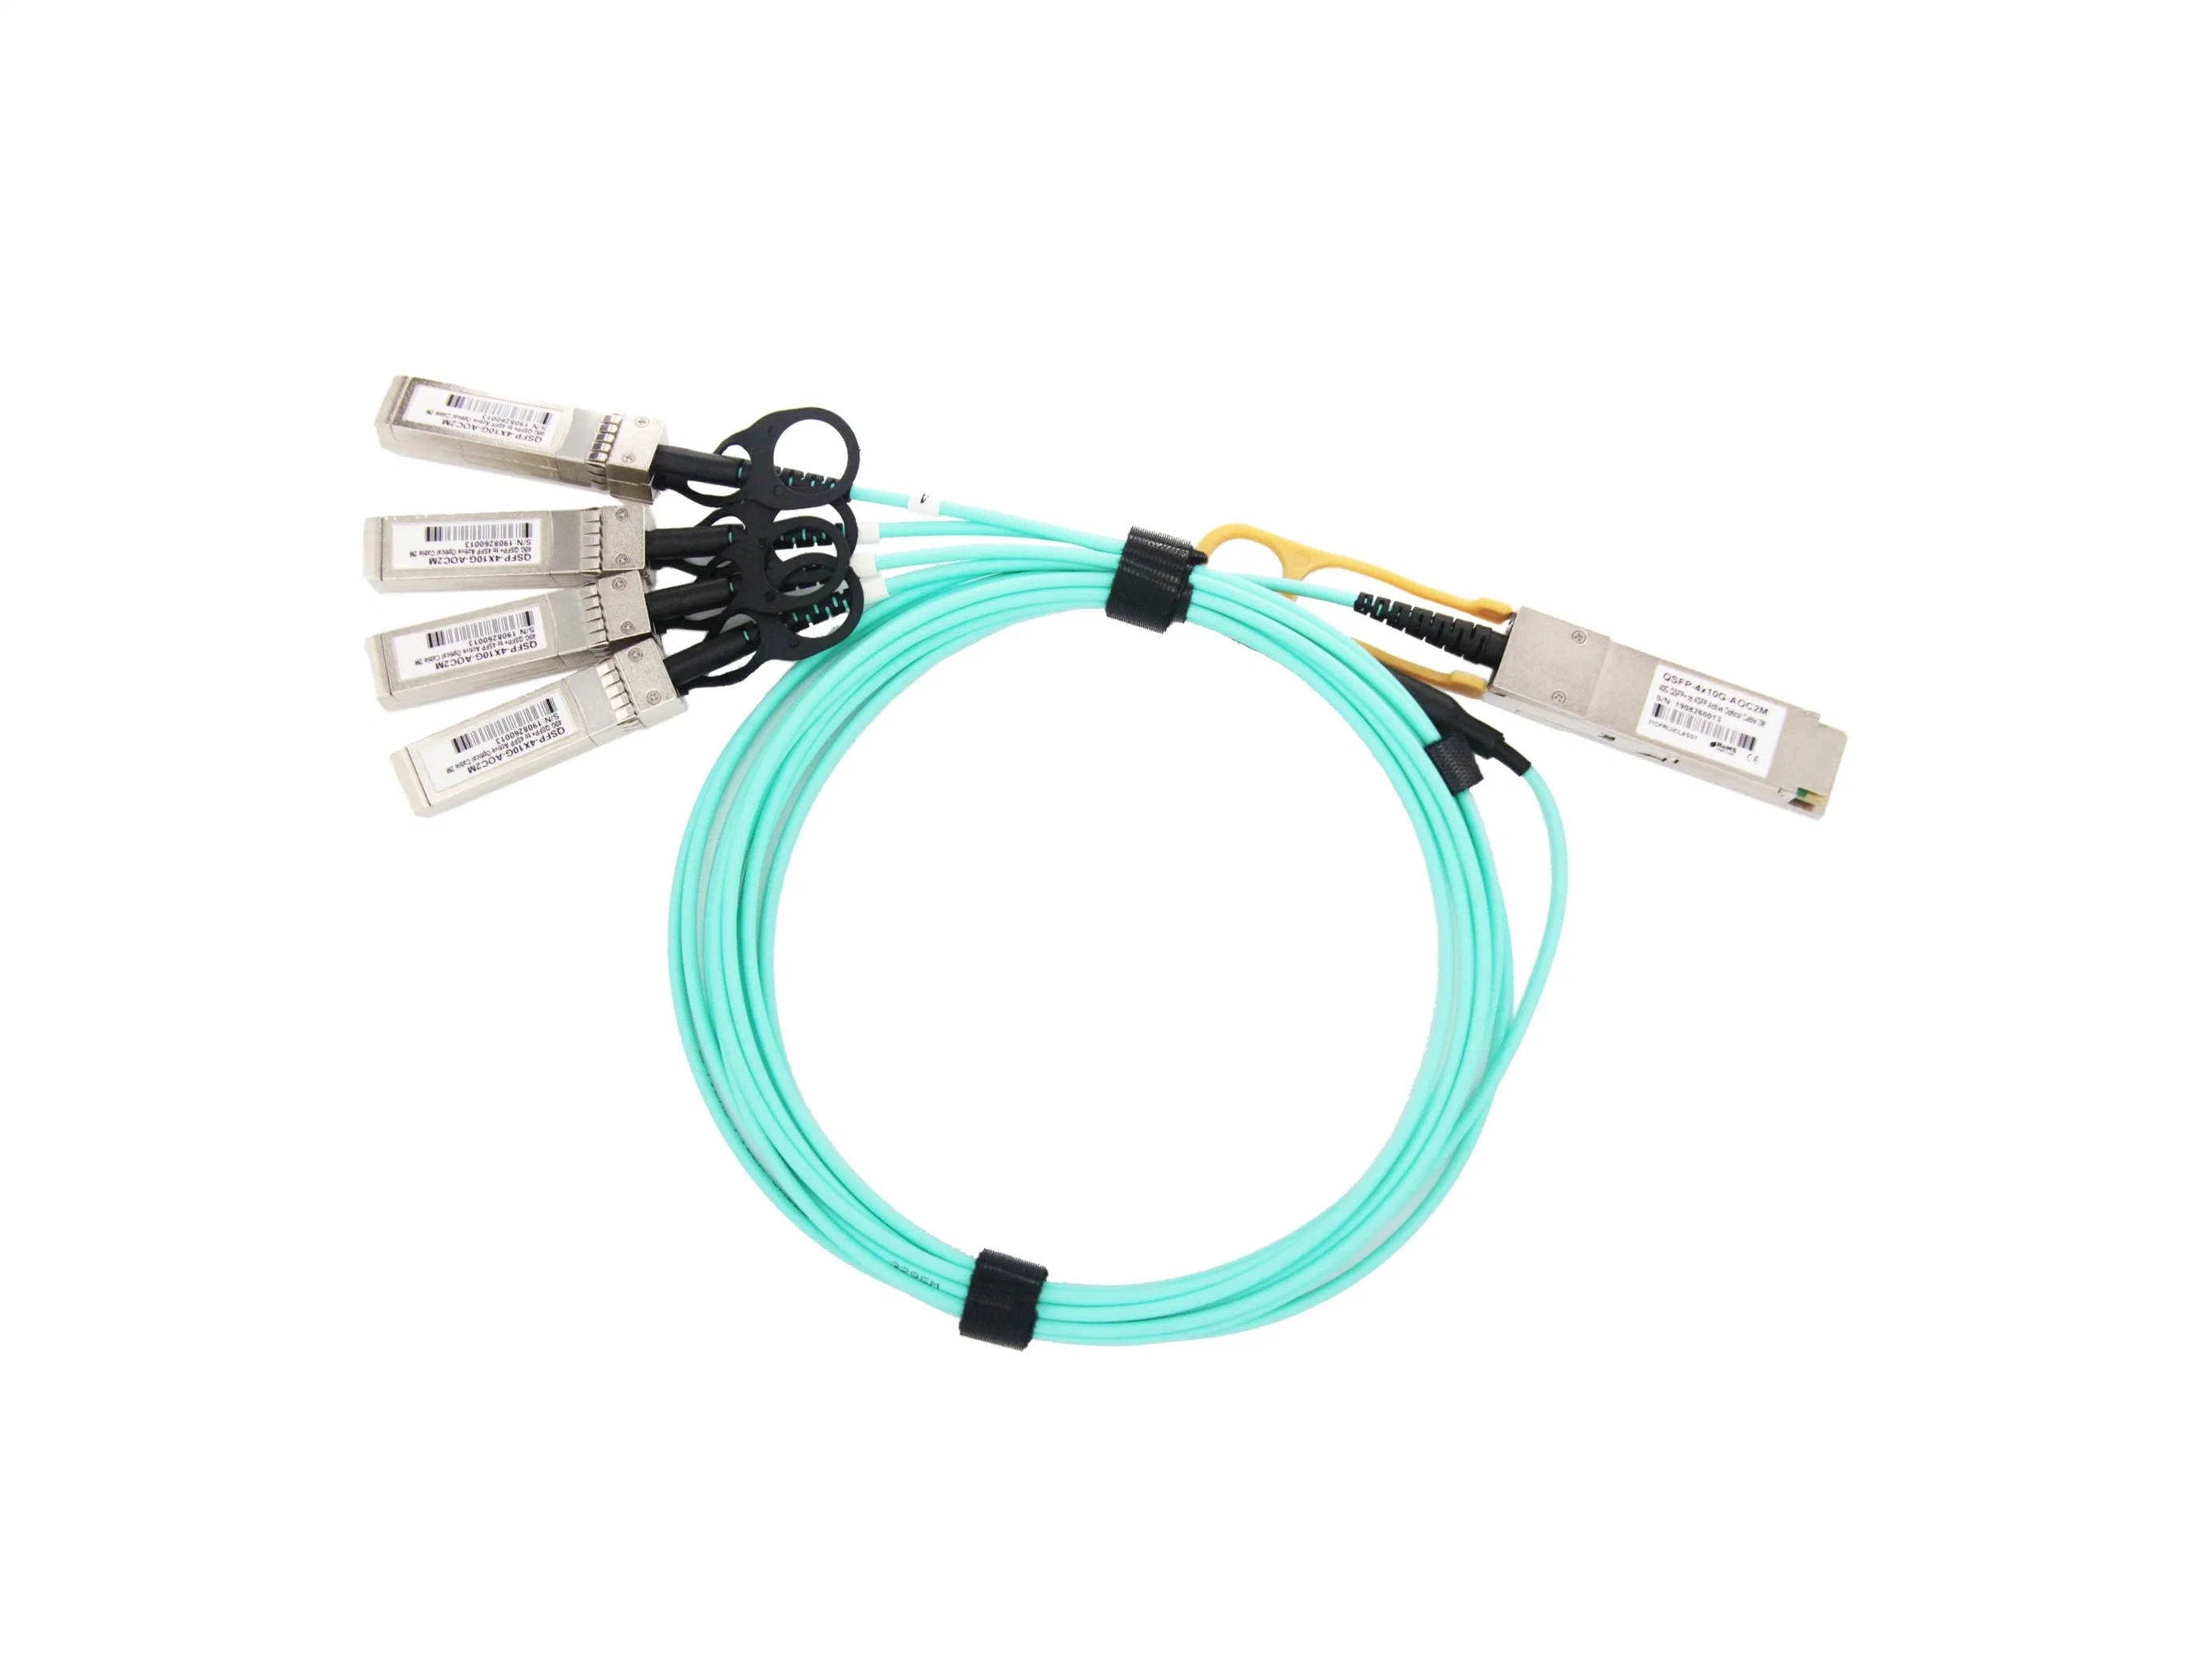 5m 40g Qsfp+ to 4X10g SFP+ Aoc Active Optical Cable Optic Cable Mmf for Ethernet and Fiber Channel